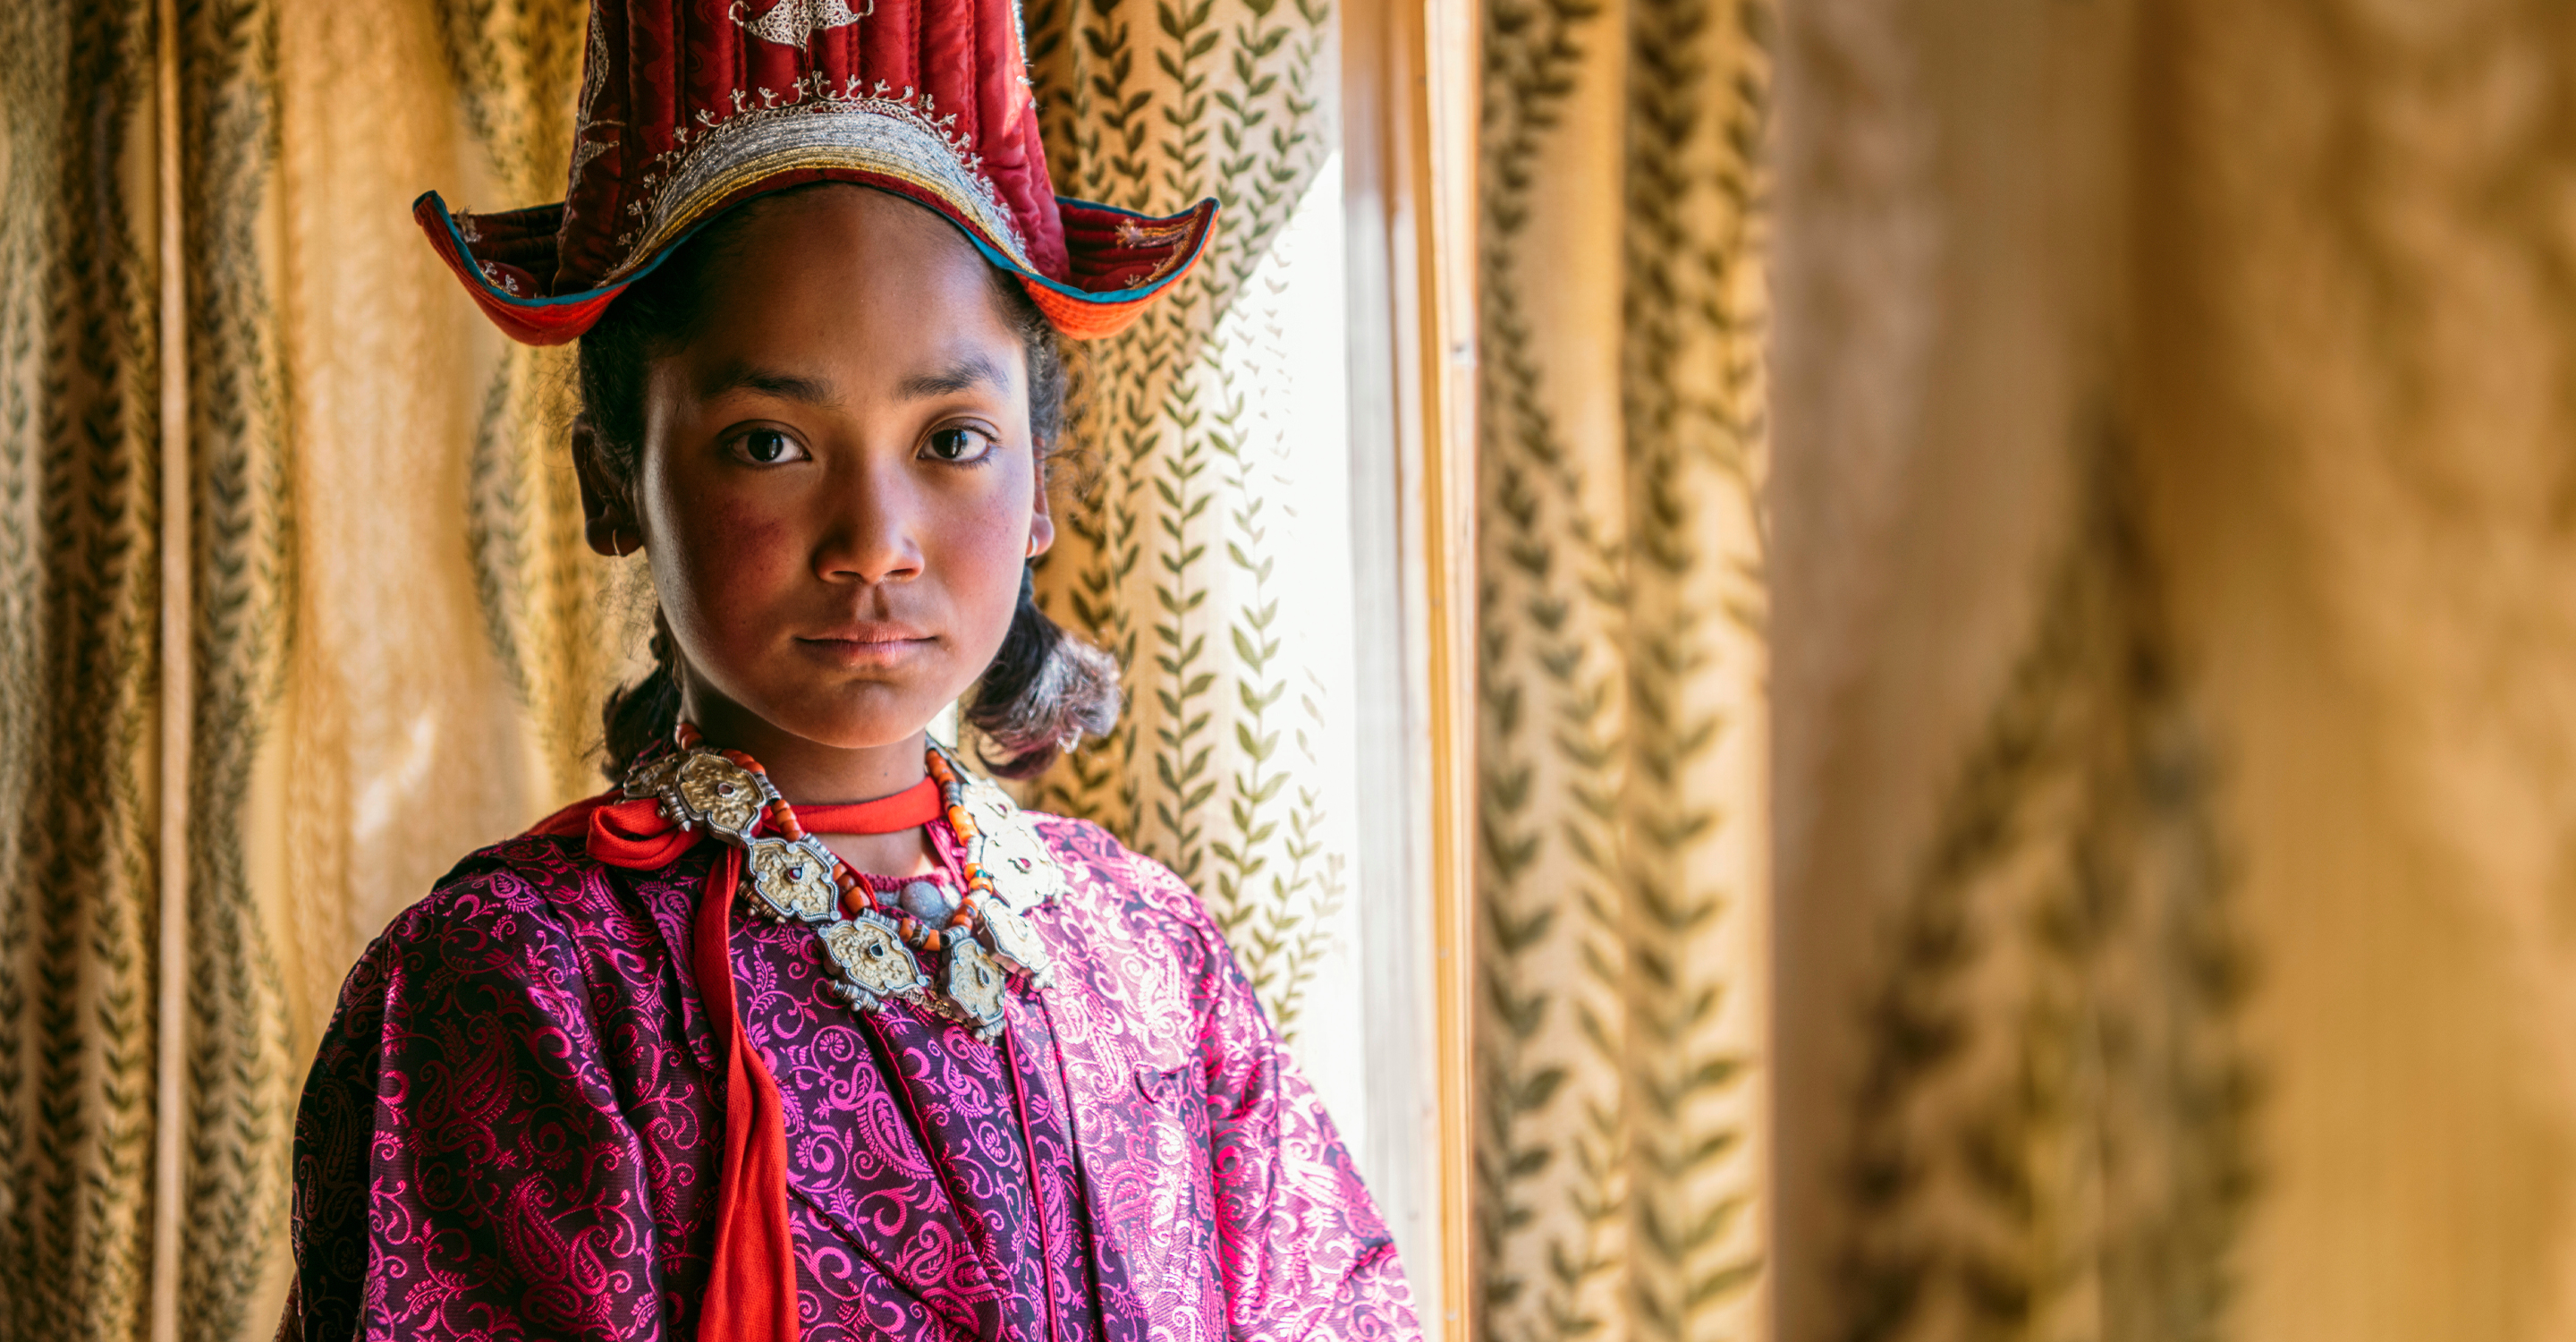 A young girl in traditional Tibetan clothing, Ladakh, India